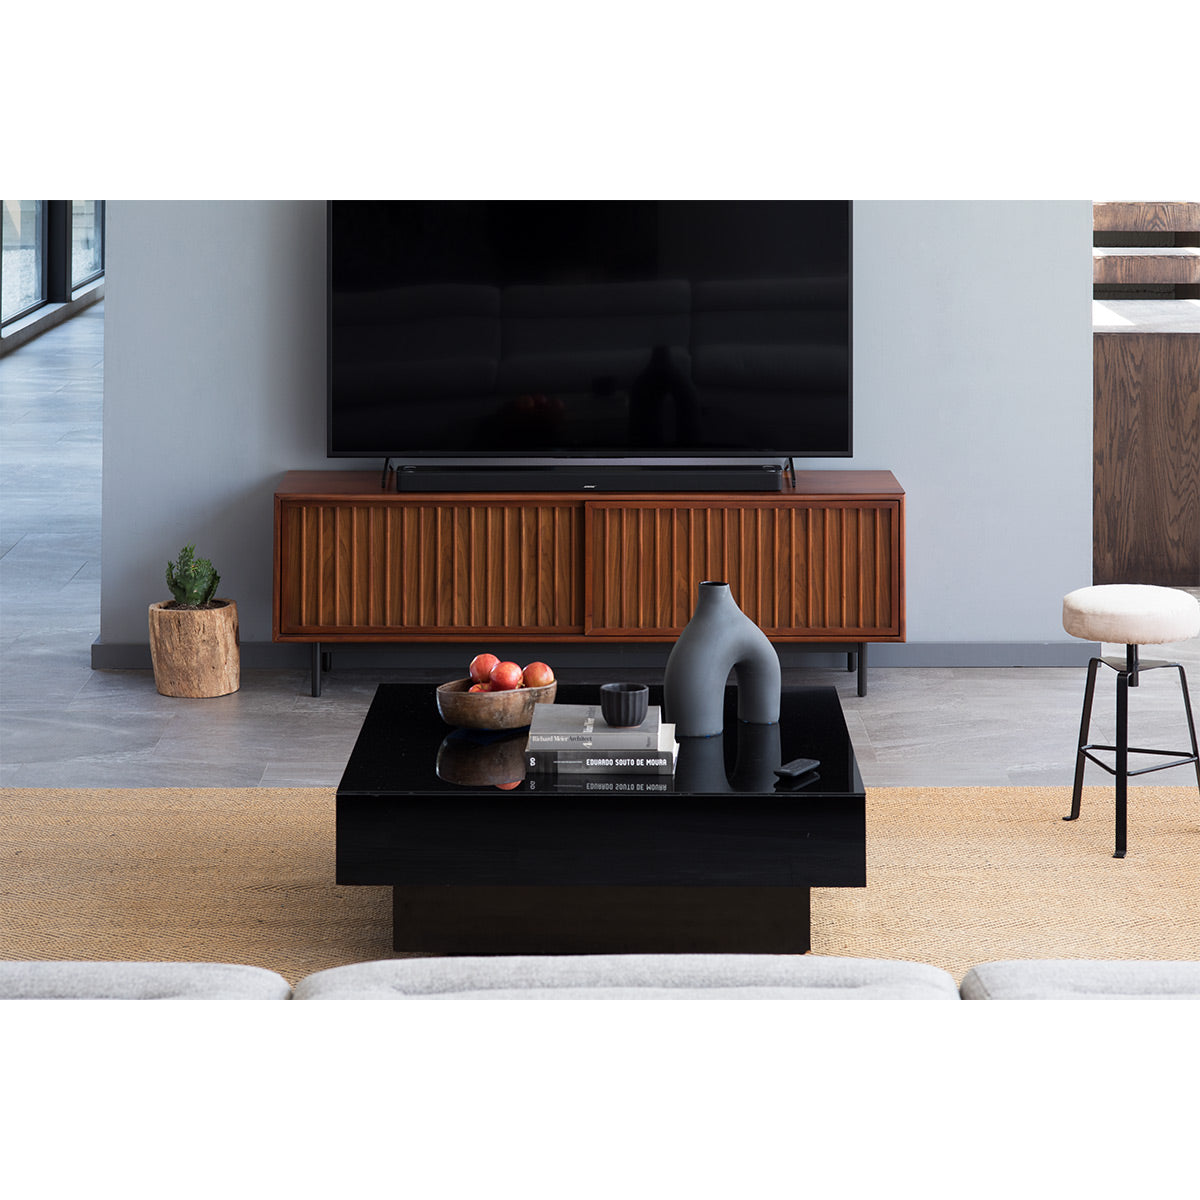 Bose® Smart Soundbar 900 (Black) Powered sound bar with Dolby Atmos®, Apple  AirPlay® 2, Chromecast built-in, Wi-Fi®, Bluetooth®,  Alexa, and  Google Assistant at Crutchfield